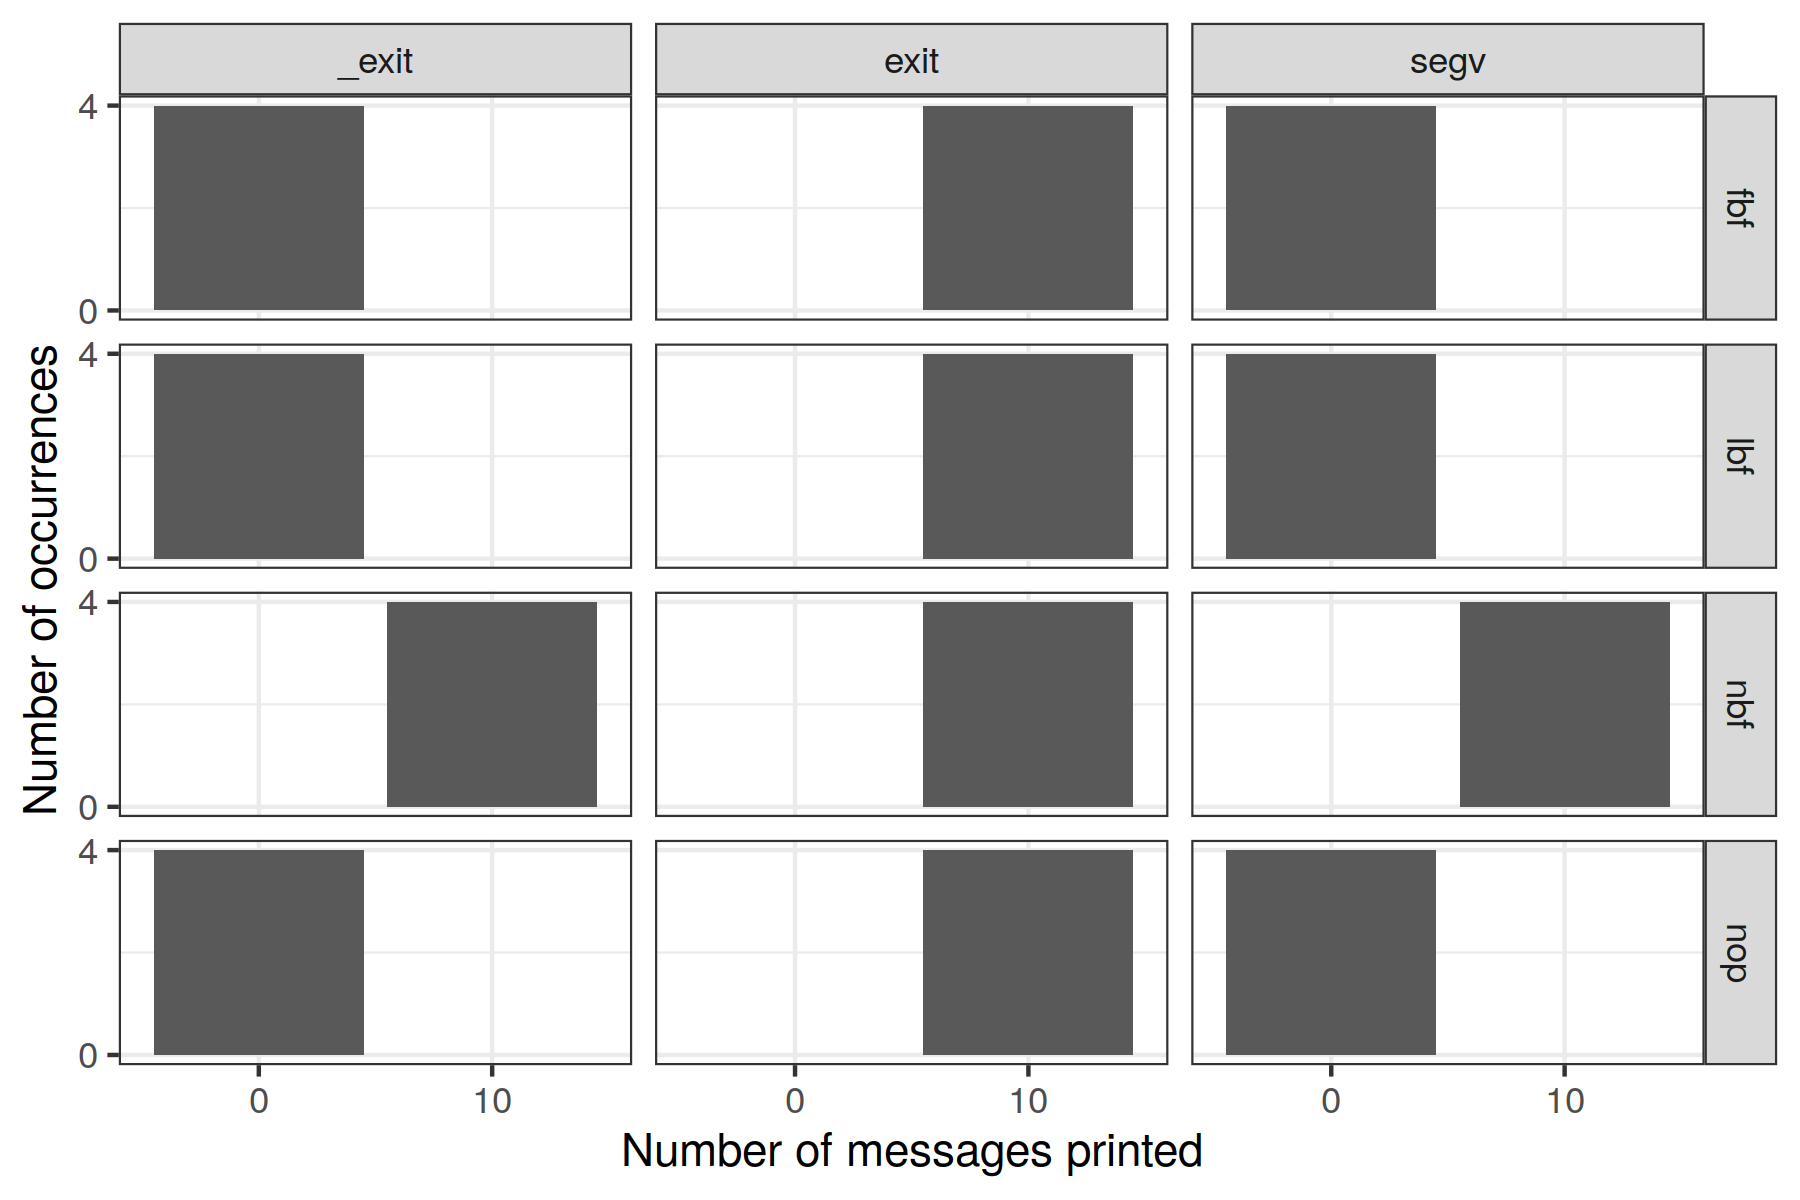 ../../_images/message-printed-p-distribution.png